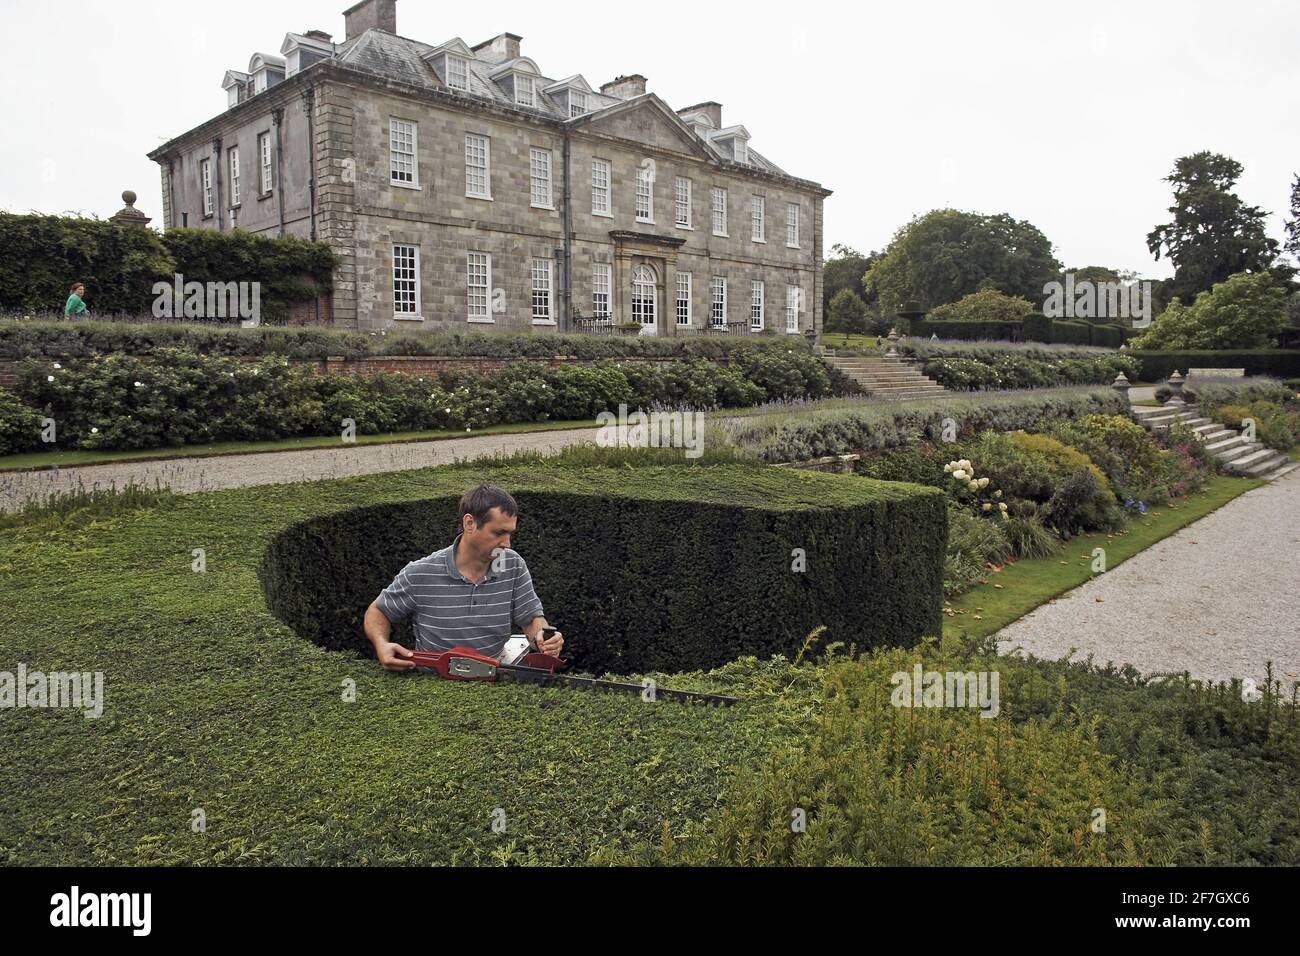 Gadener with electric hedge trimmer in the grounds of Antony House, Torpoint, Cornwall, England, UK Stock Photo